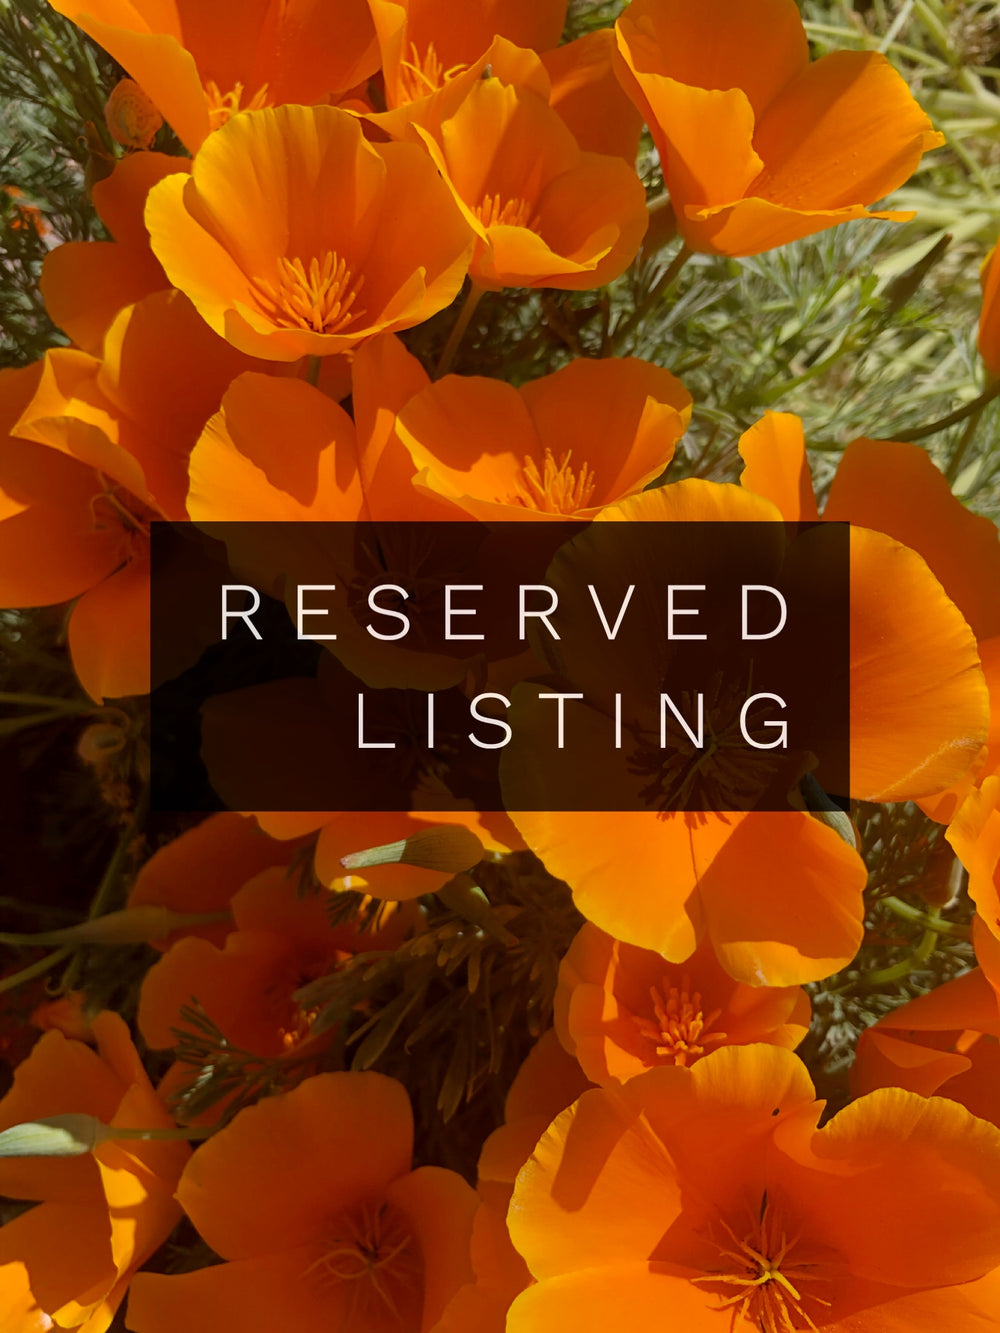 RESERVED LISTING - gasolineglamour